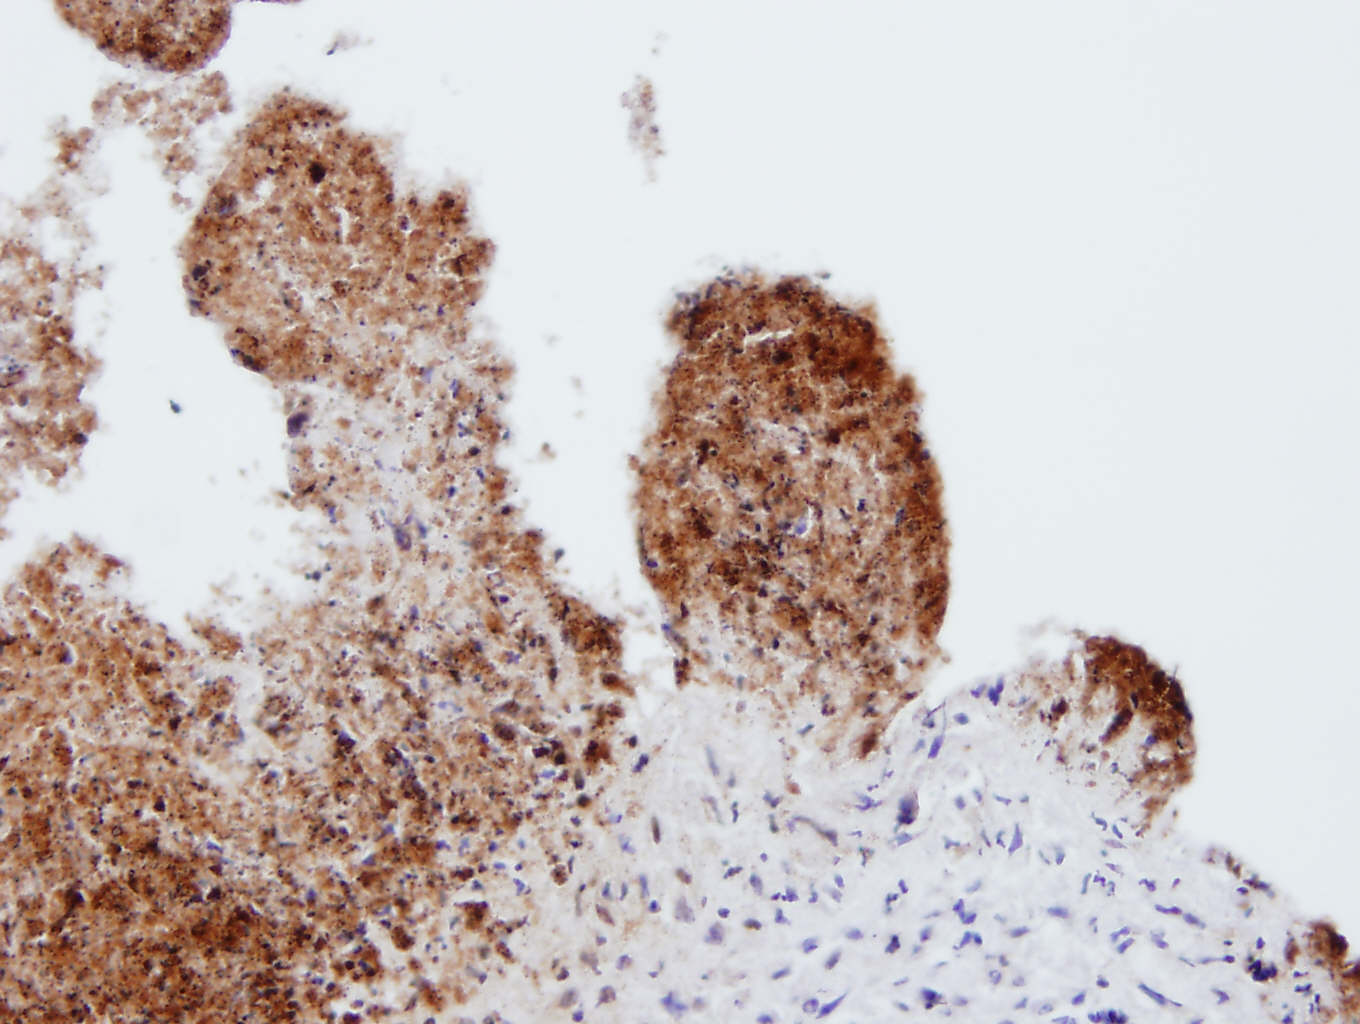 Figure 1. Expression of the chemokine CXCL8 in an inflamed placenta from a sheep infected with C. abortus.